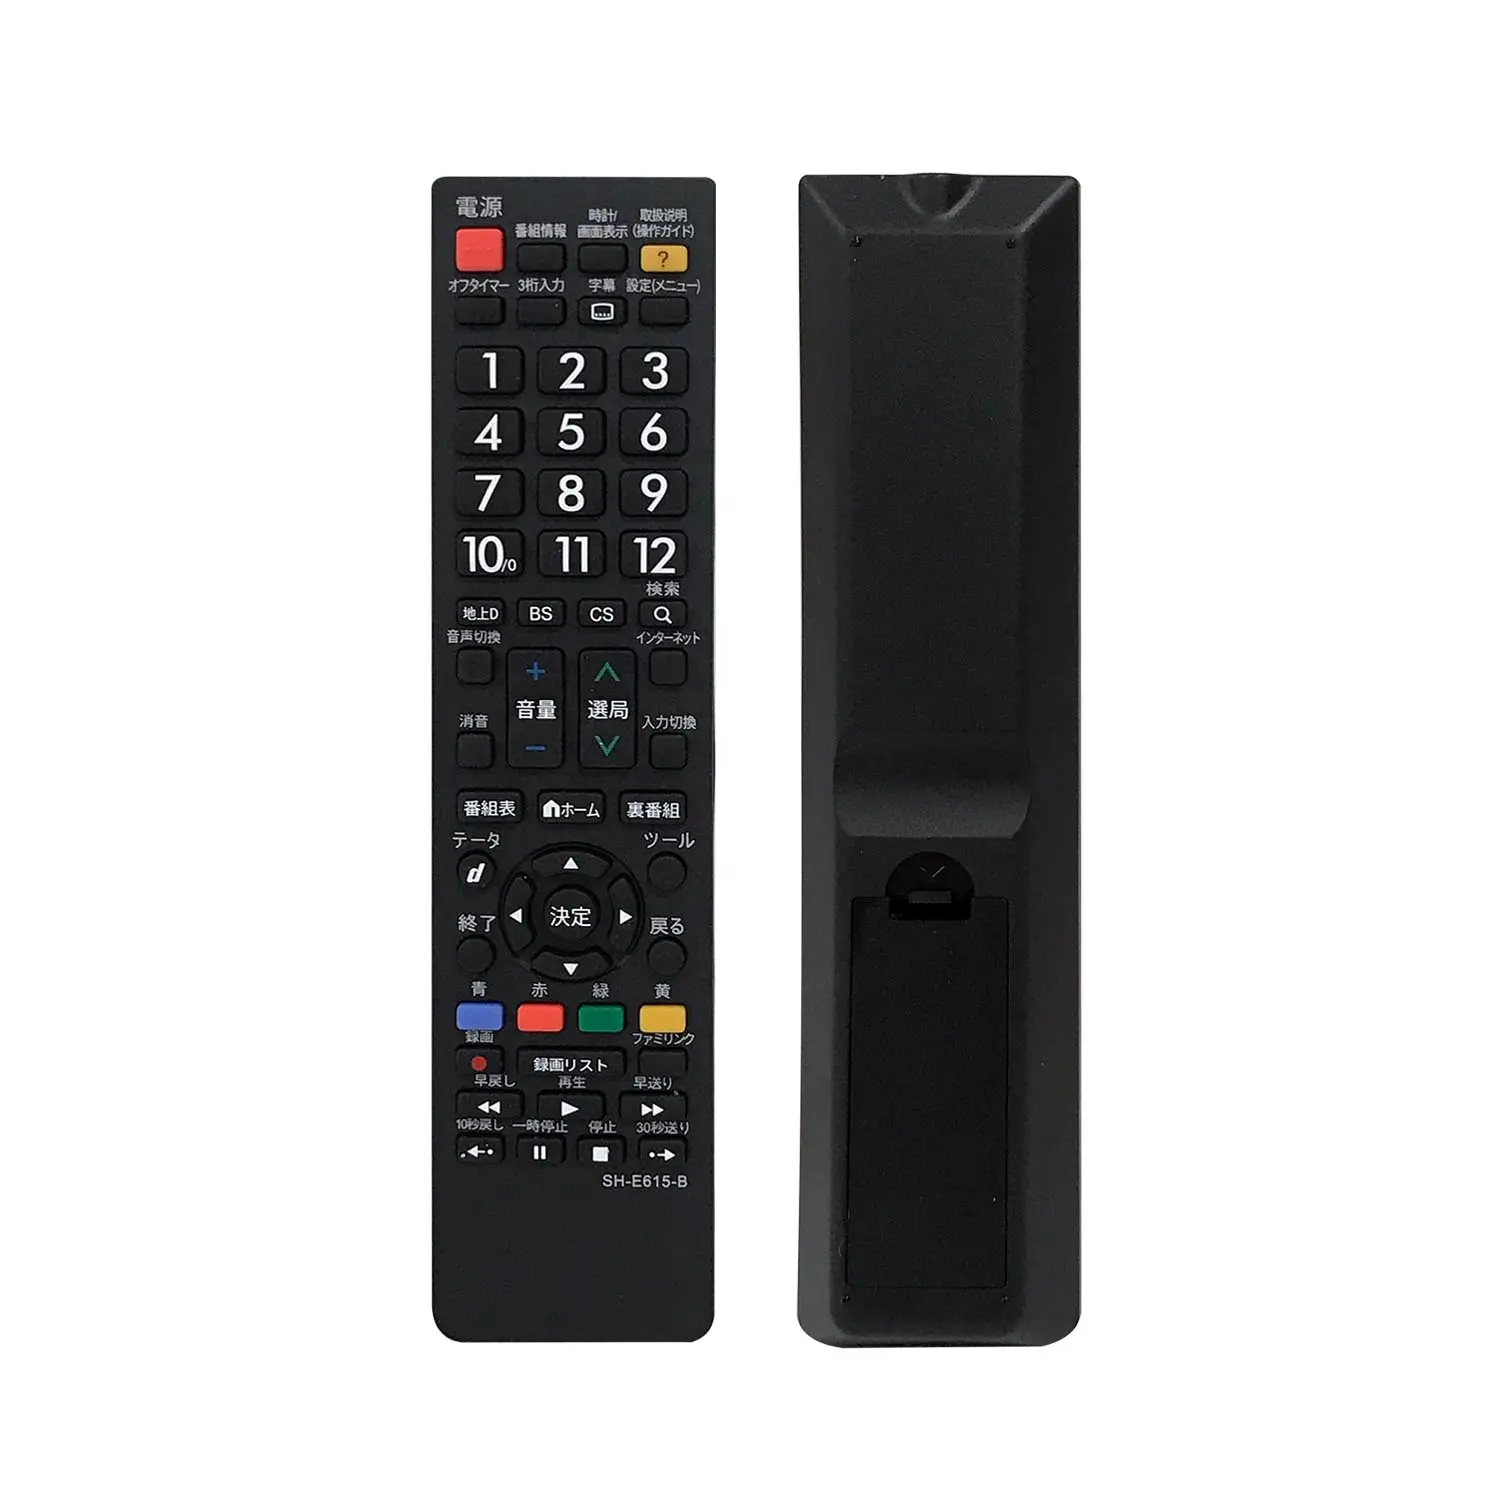 SYSTO SH-E615 USE FOR SHARP UNIVERSAL REMOTE CONTROL FOR LCD LED TV FOR JAPAN MARKET WITH JAPANESE BUTTON